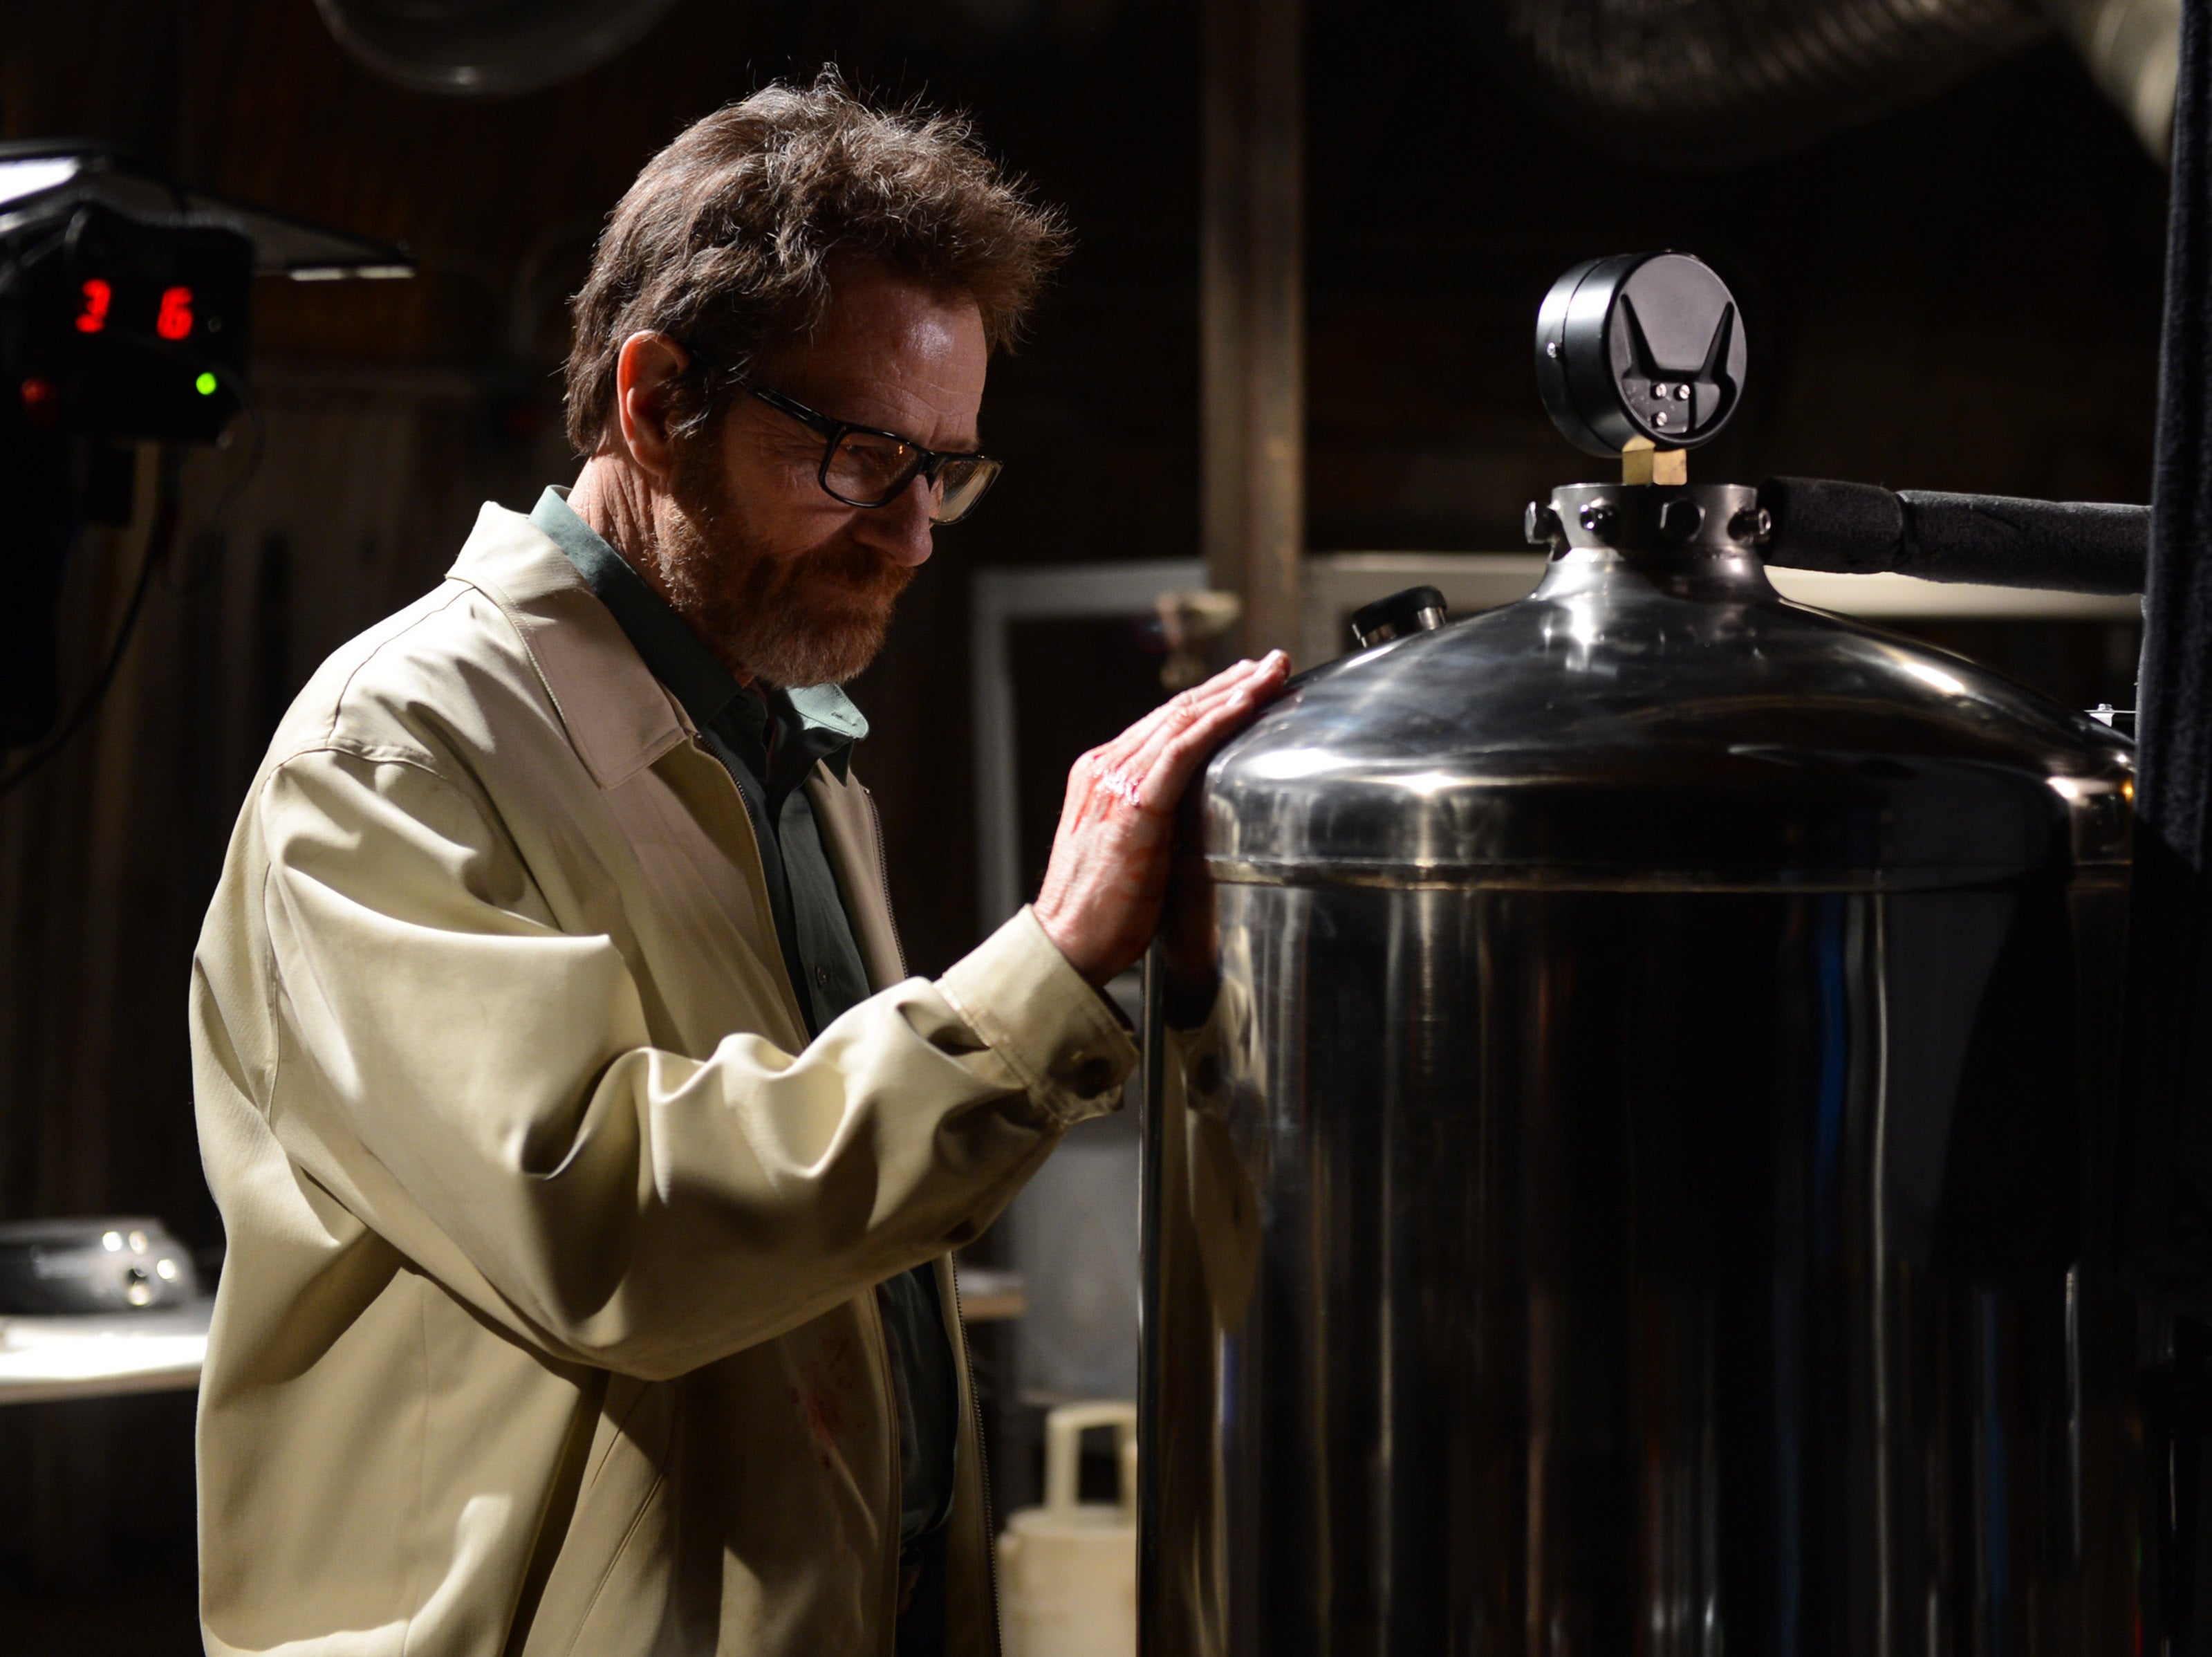 Bad to the bone: Bryan Cranston as Walter White in the divisive Breaking Bad finale